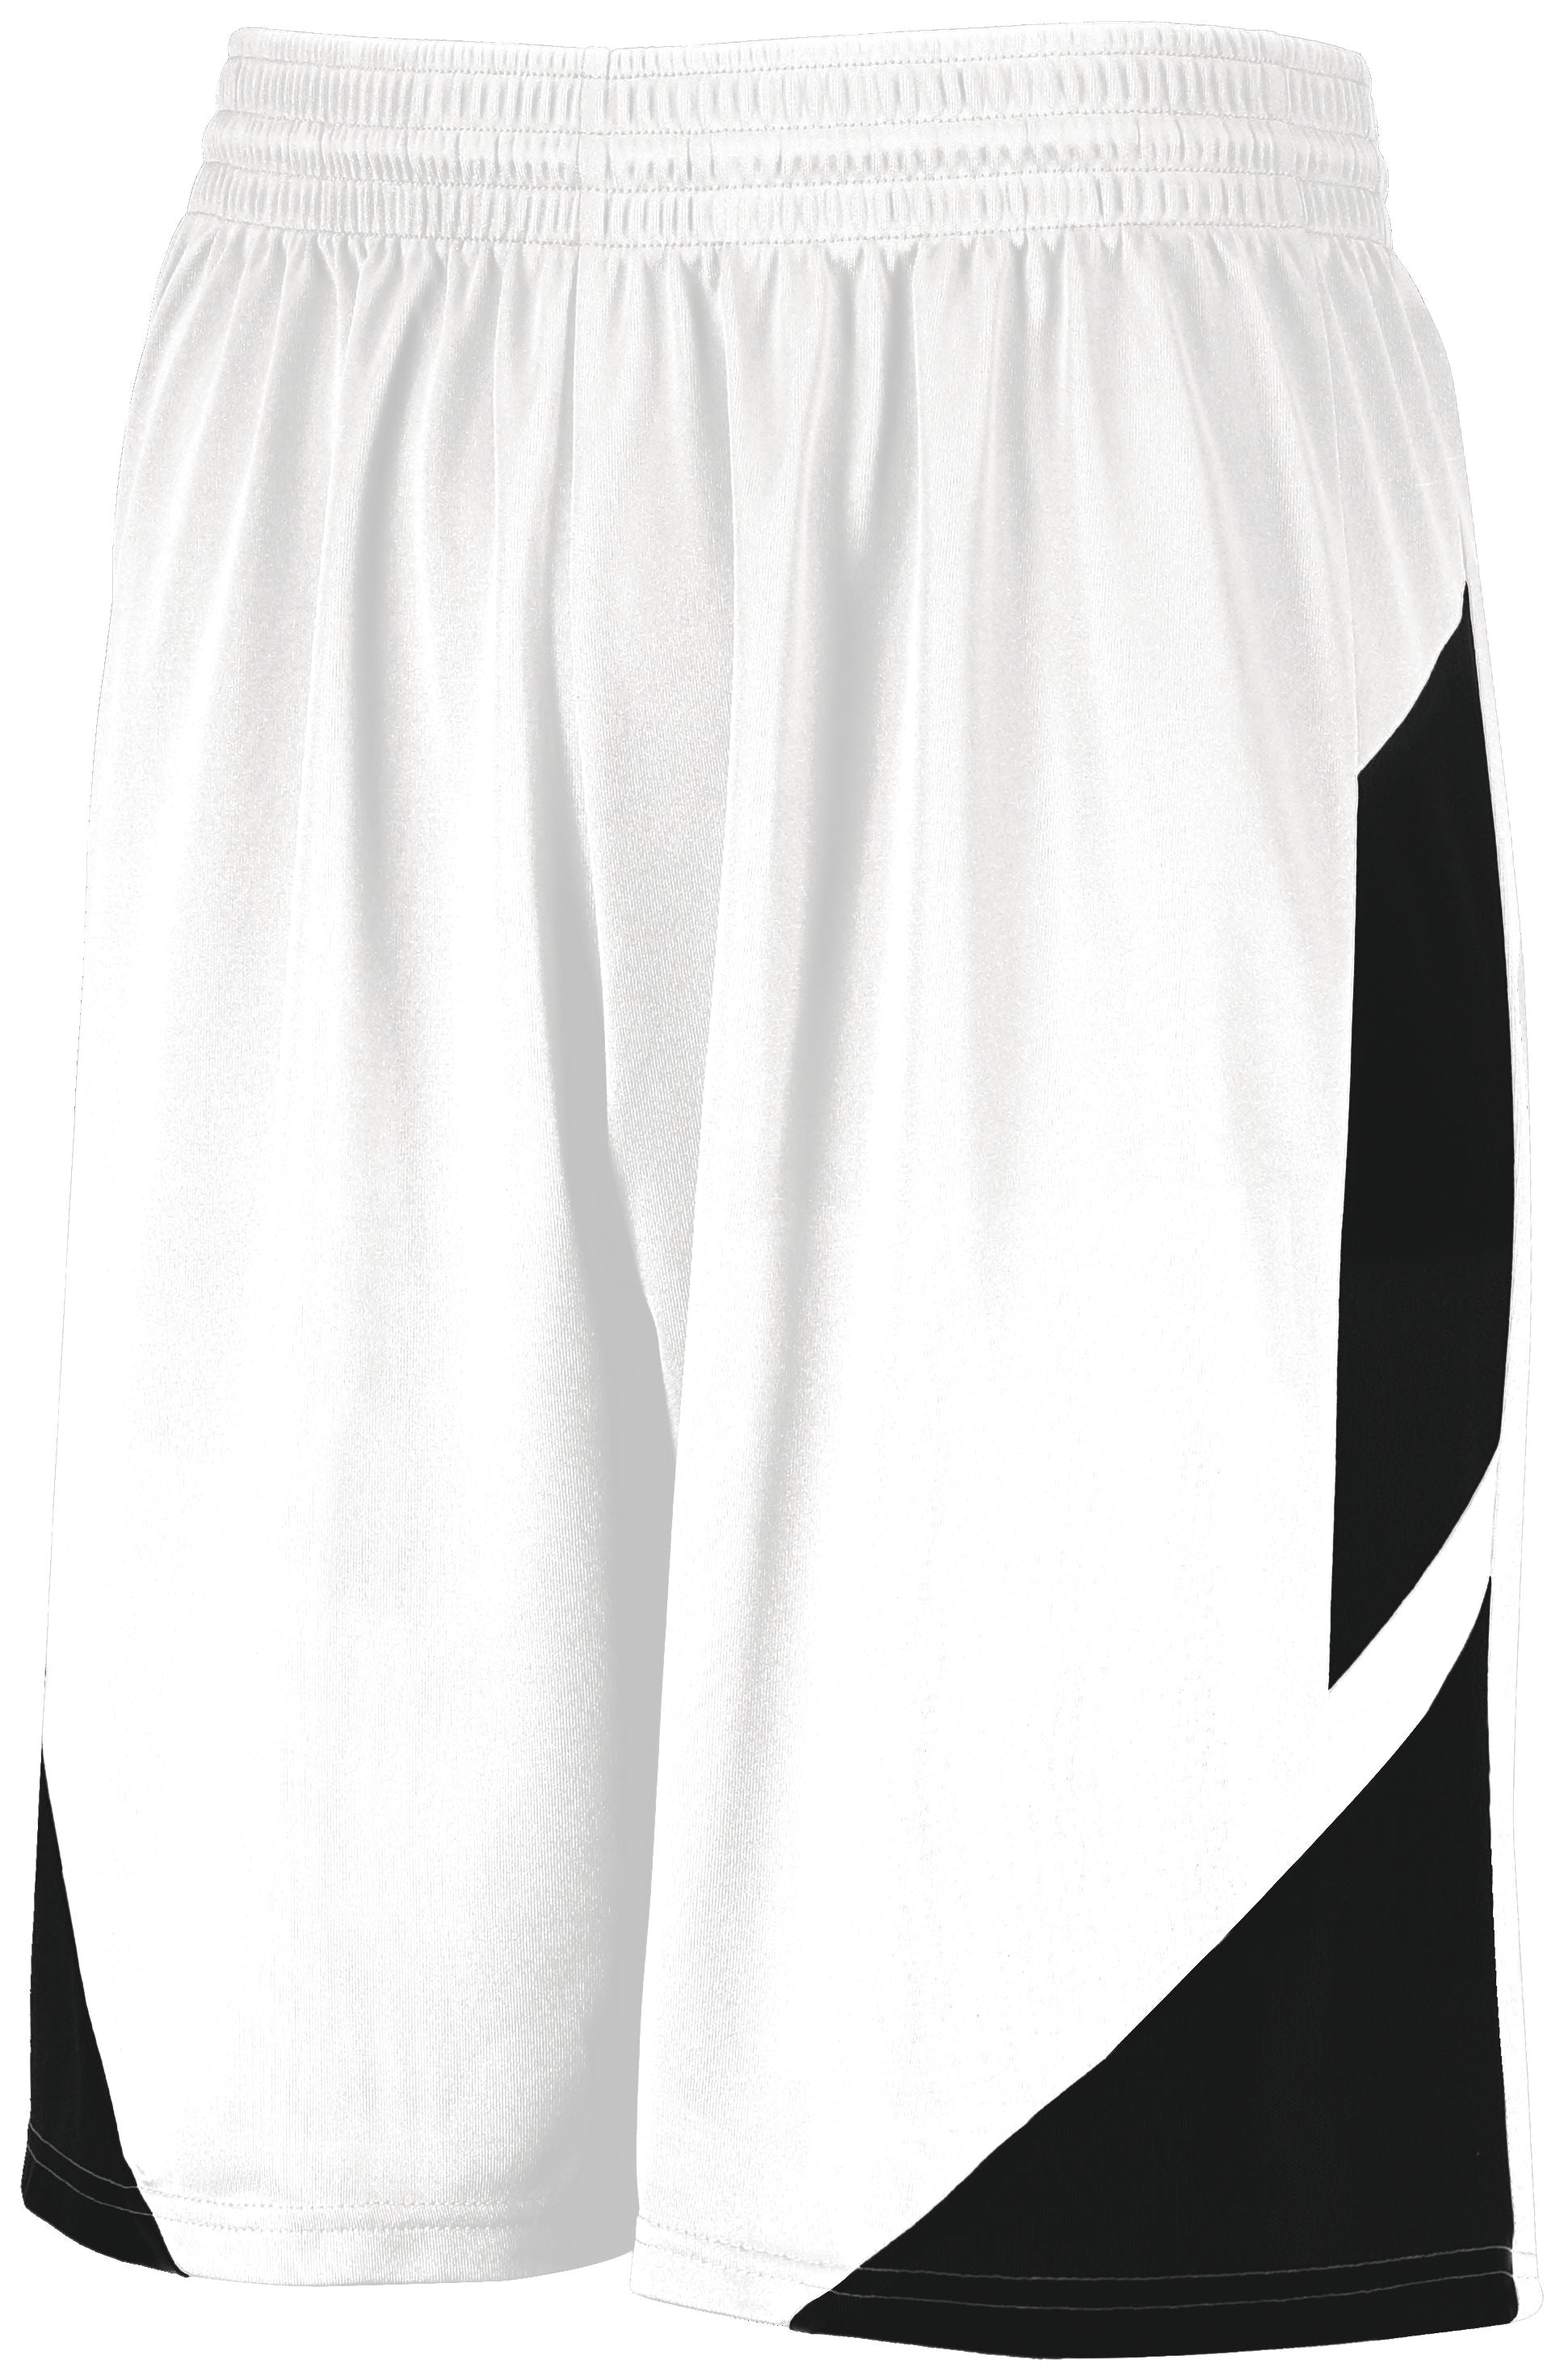 Augusta Sportswear Step-Back Basketball Shorts in White/Black  -Part of the Adult, Adult-Shorts, Augusta-Products, Basketball, All-Sports, All-Sports-1 product lines at KanaleyCreations.com